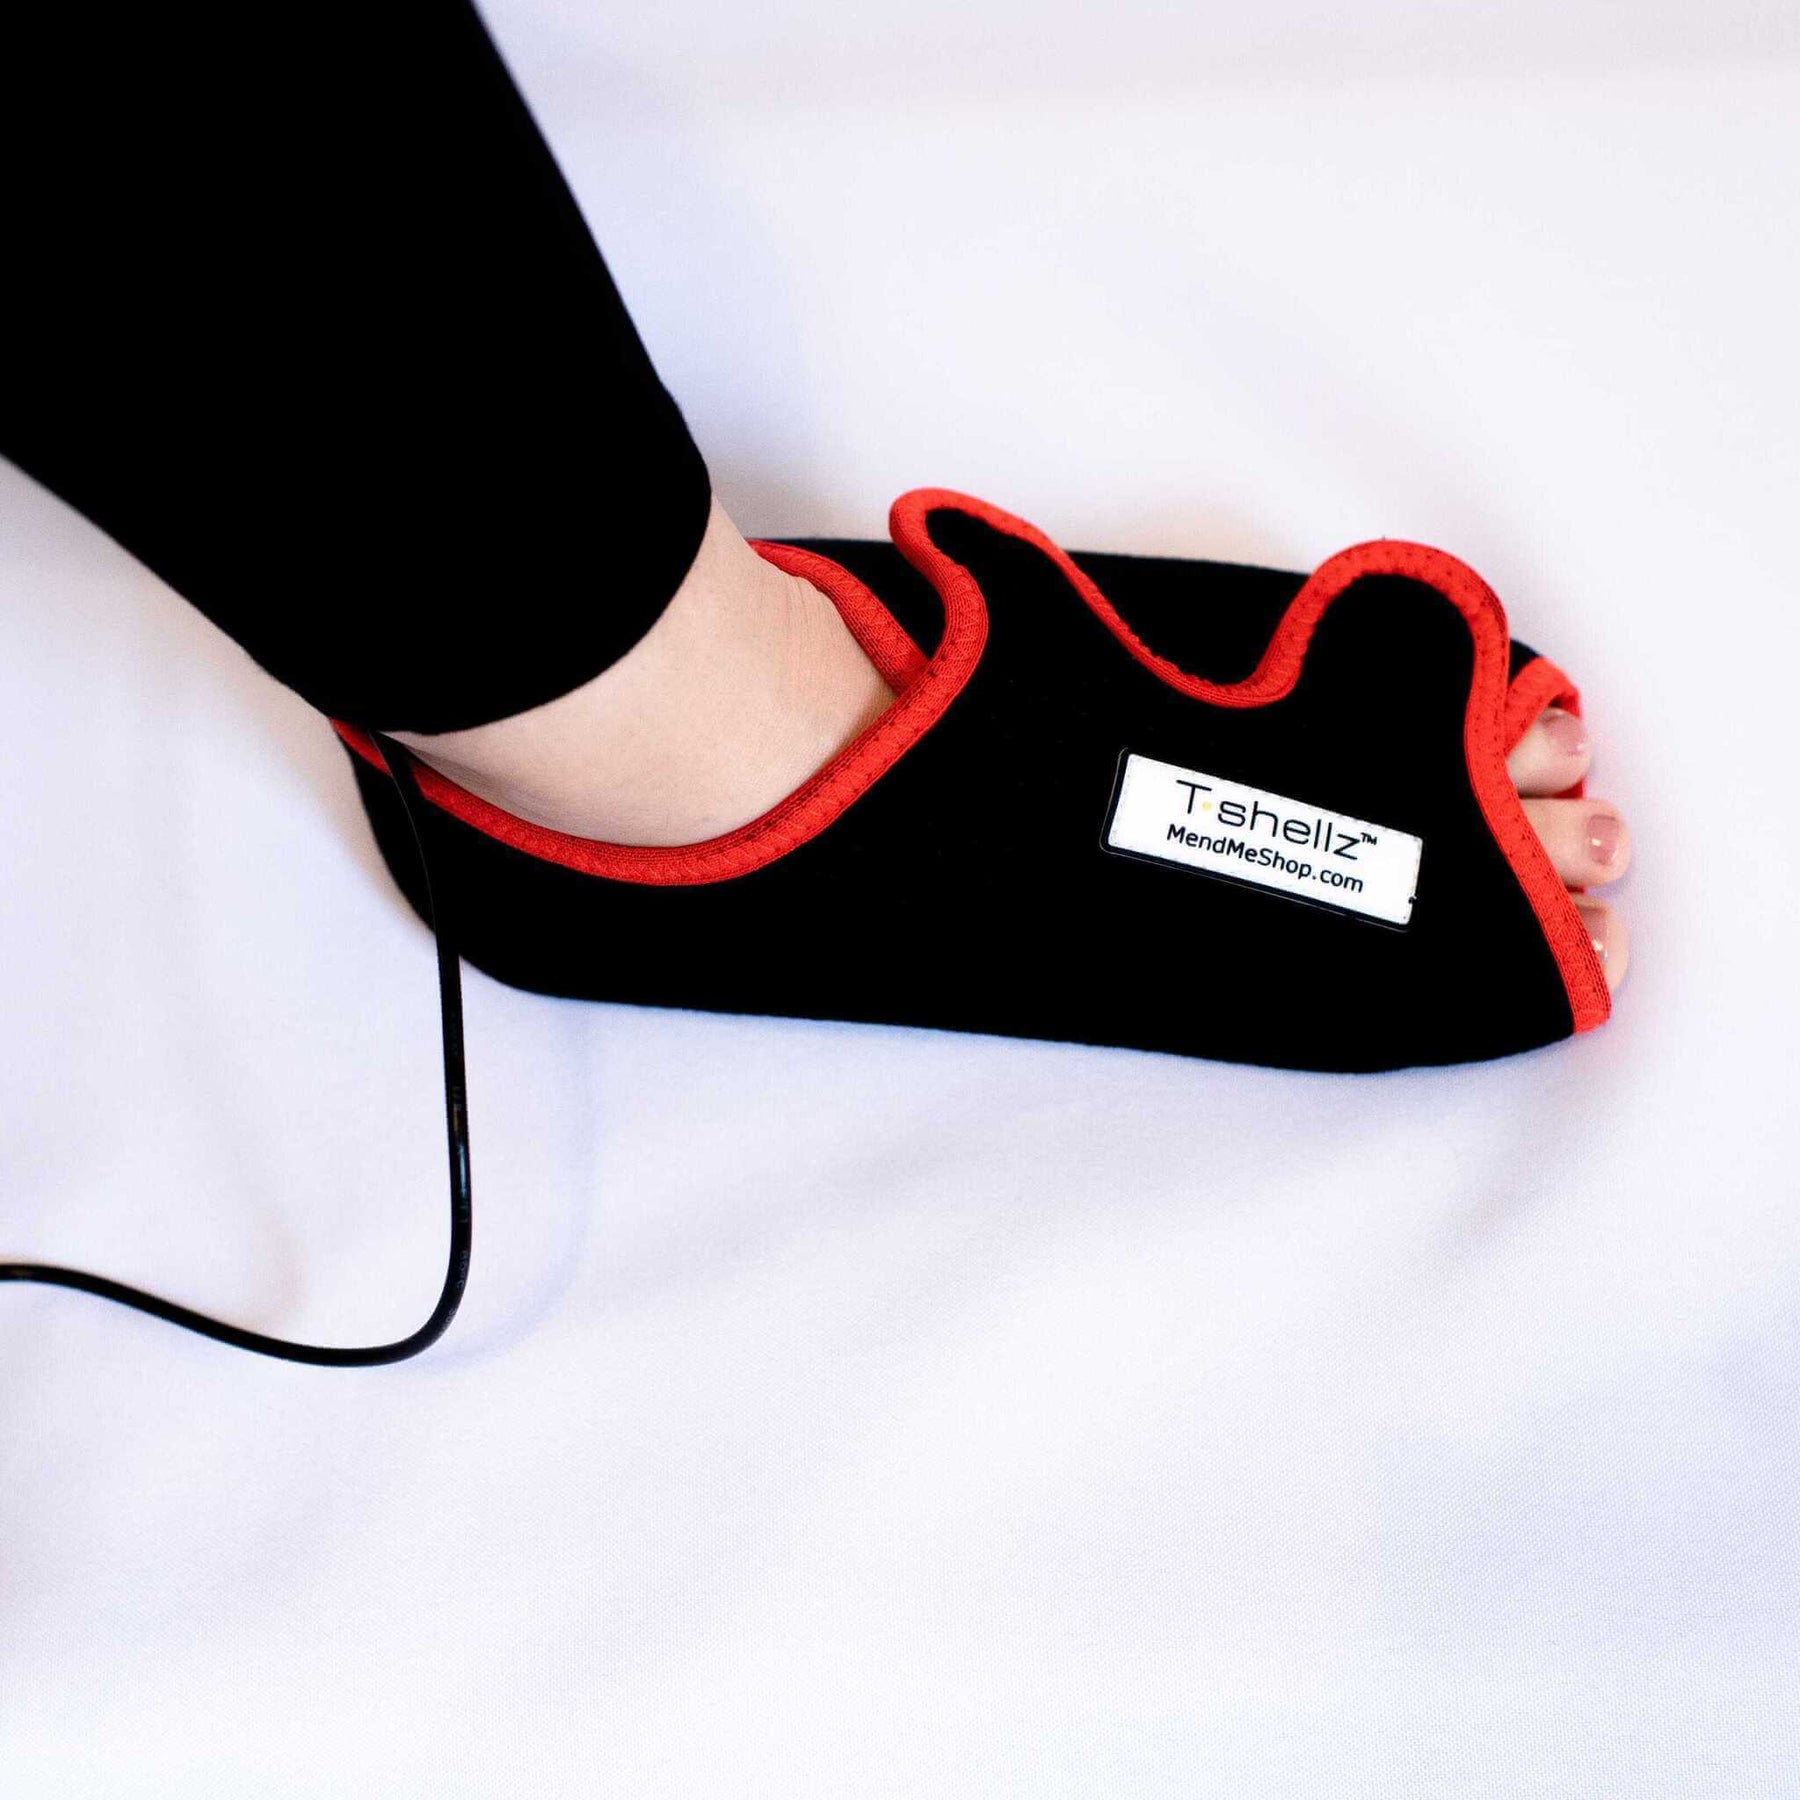 Motion Flex Strap - Guarenteed to Relieve Your Heel Pain or Your Money